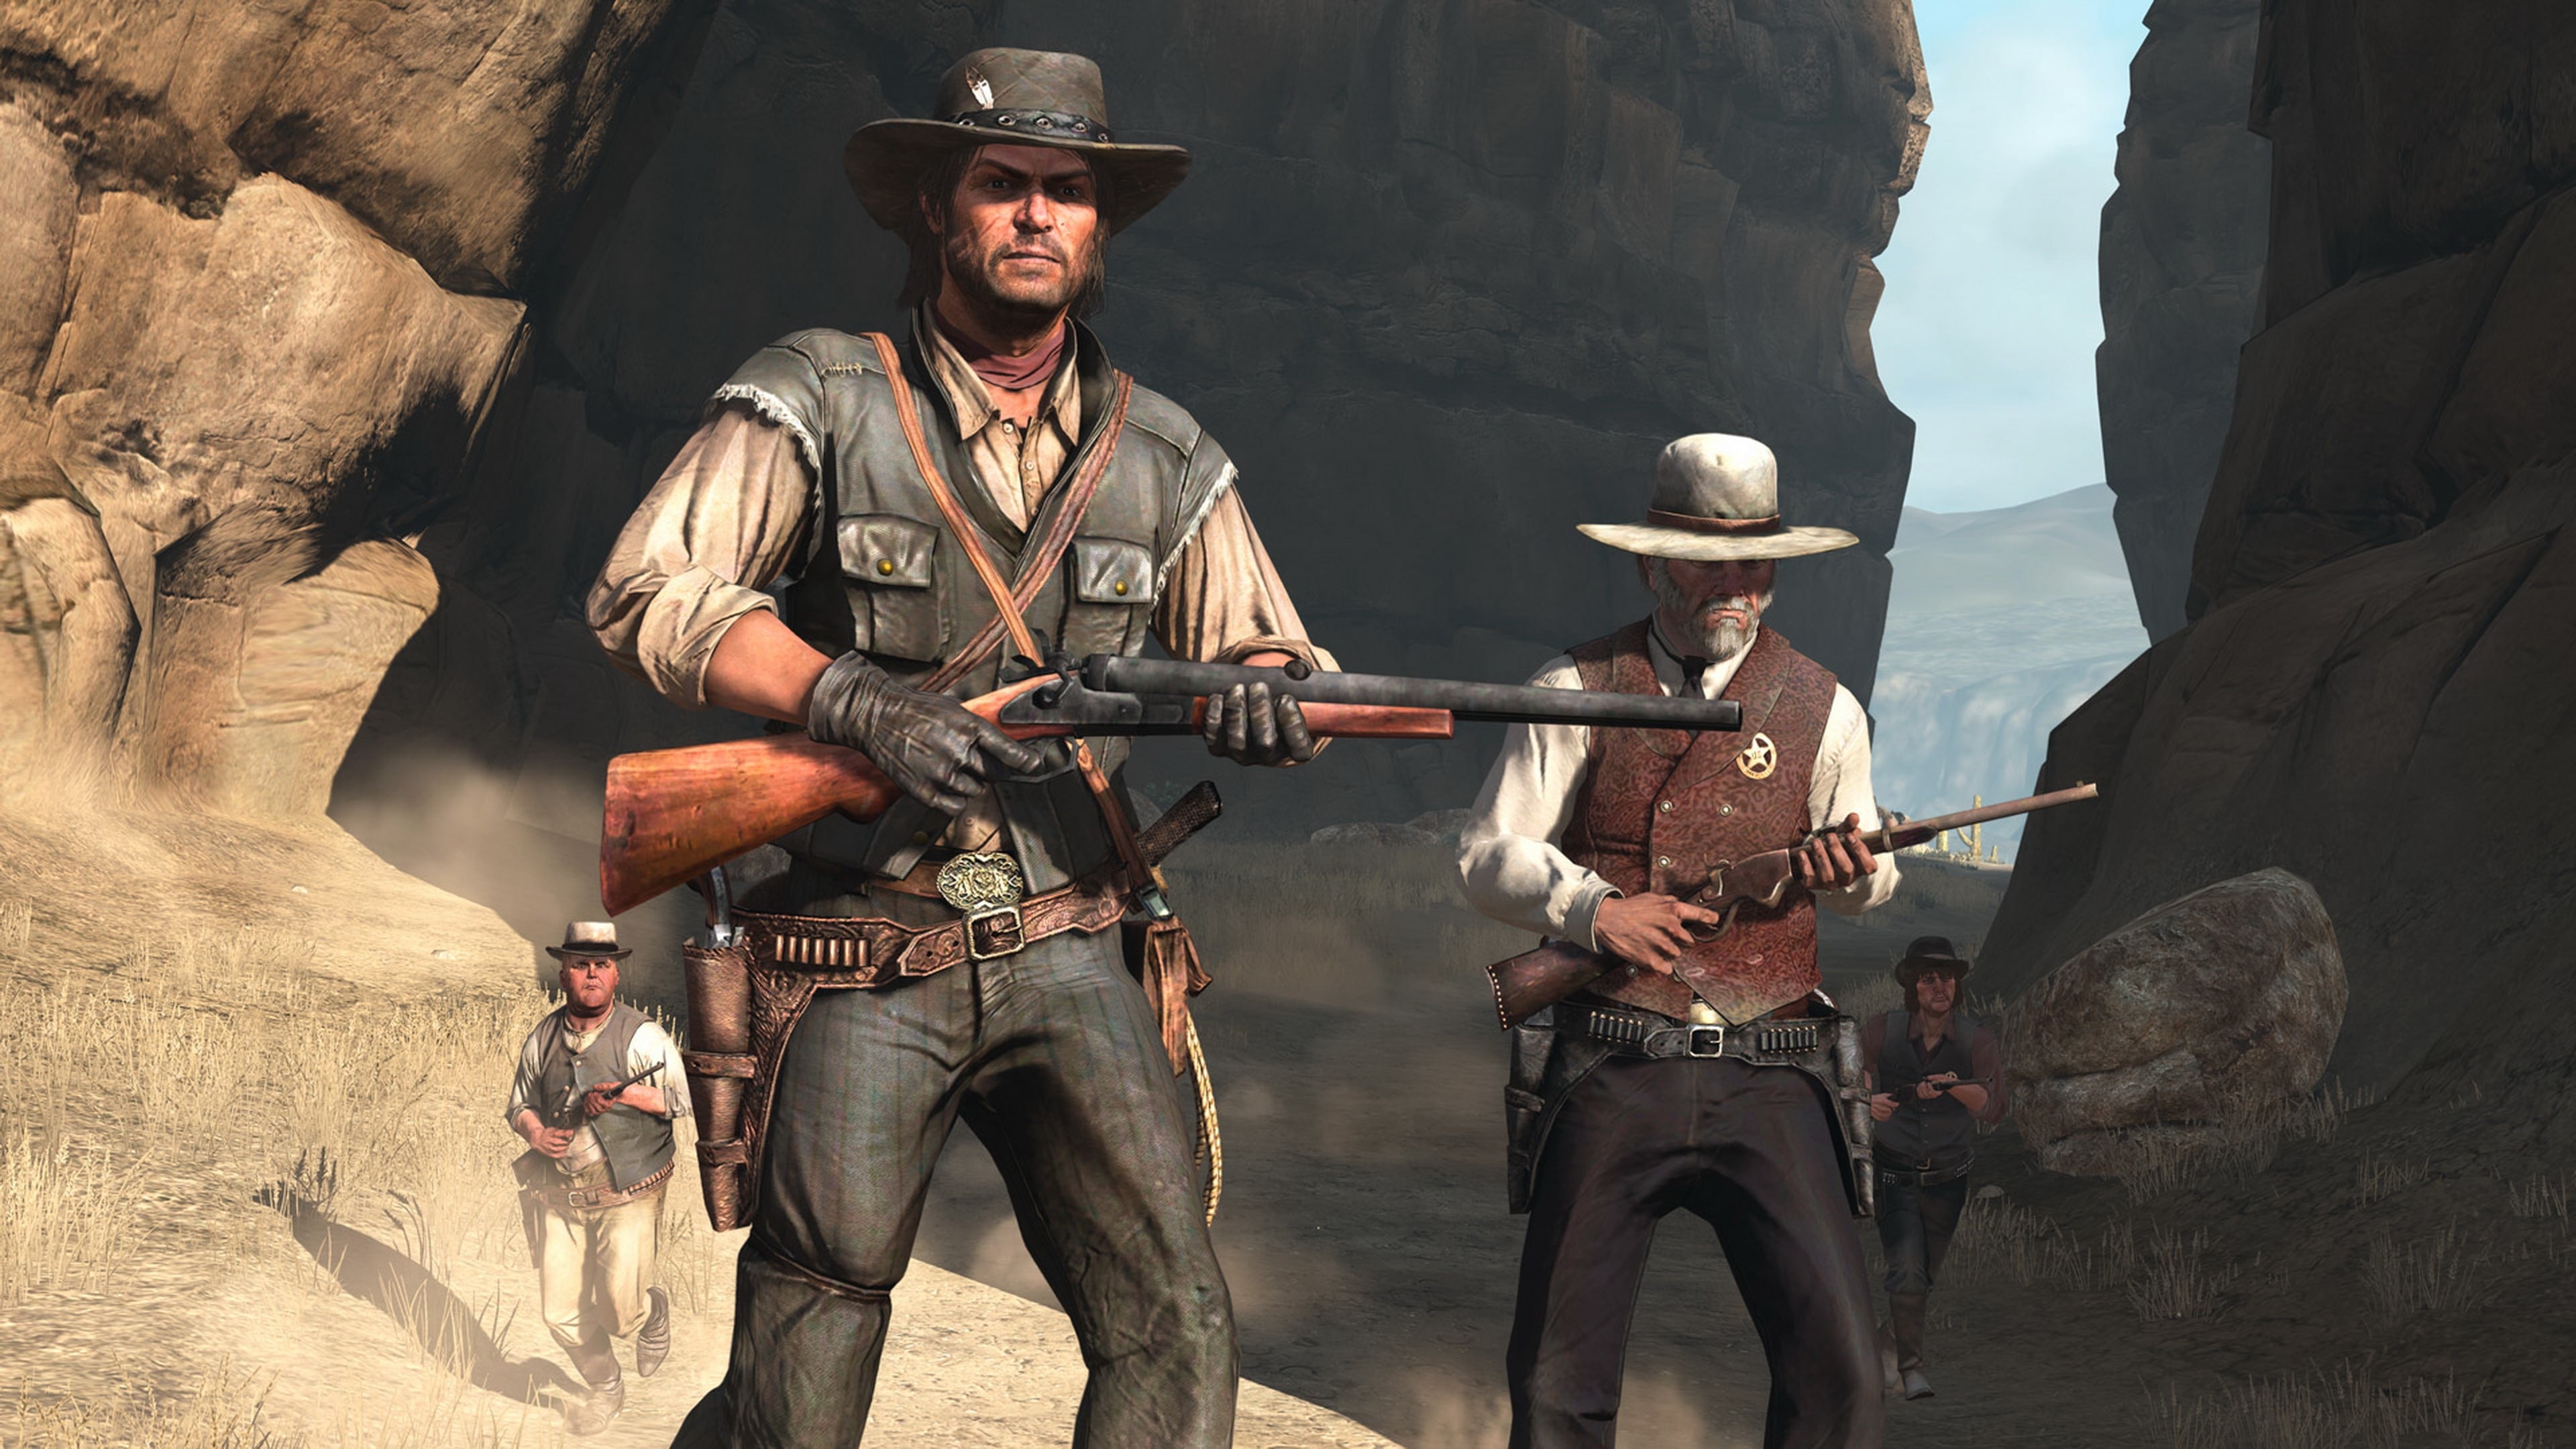 Red Dead Redemption is coming to PS4 and Nintendo Switch, no remaster -  RockstarINTEL